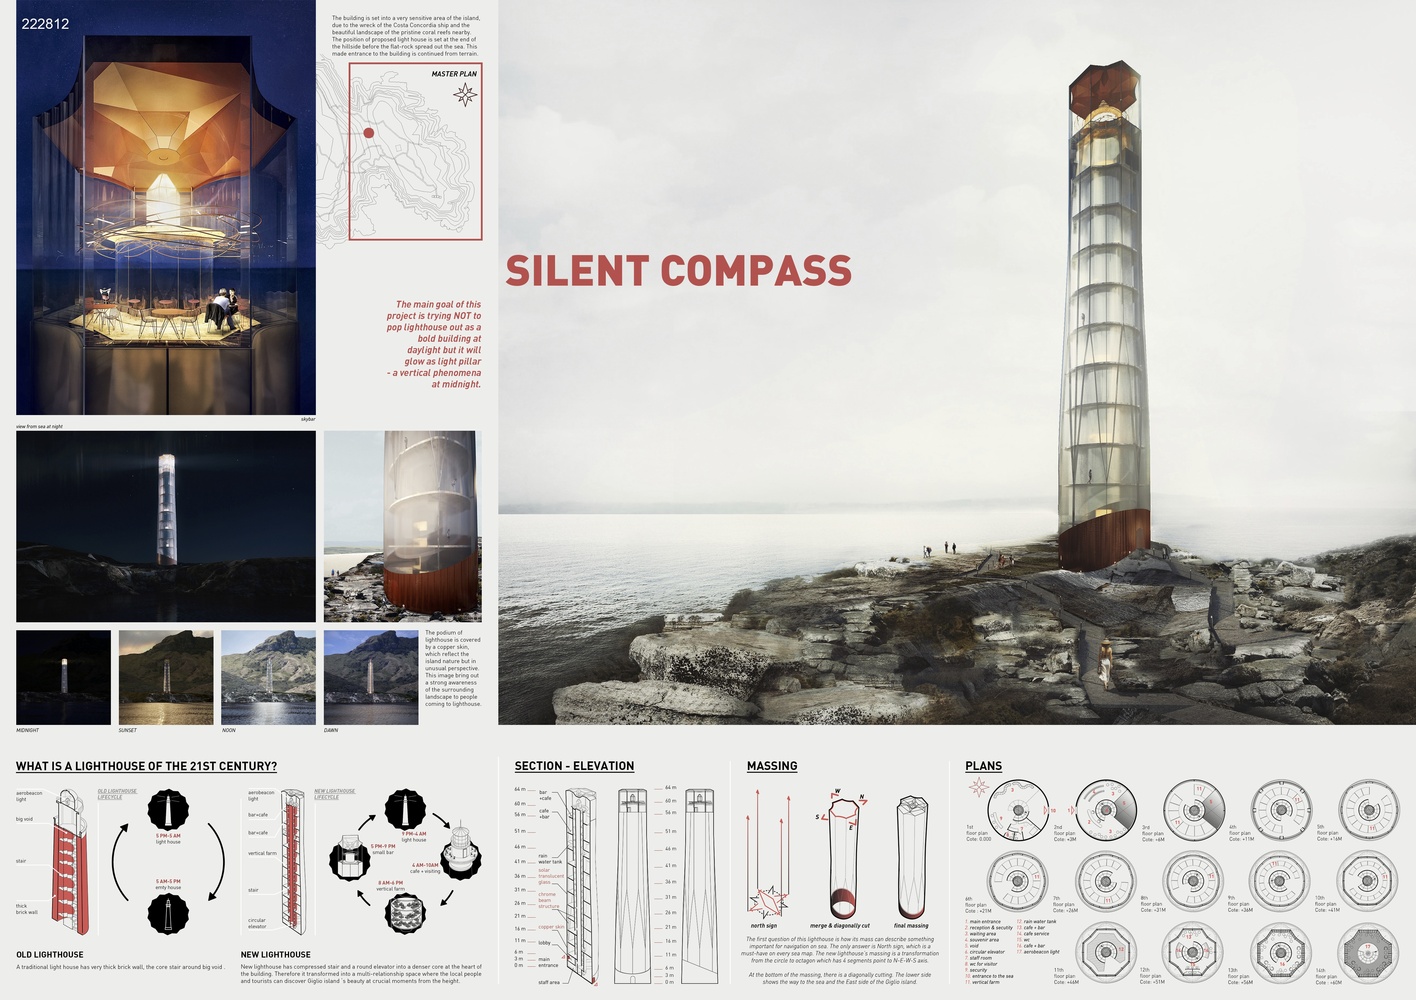 I Want To Build All These Amazing Alternative Lighthouses